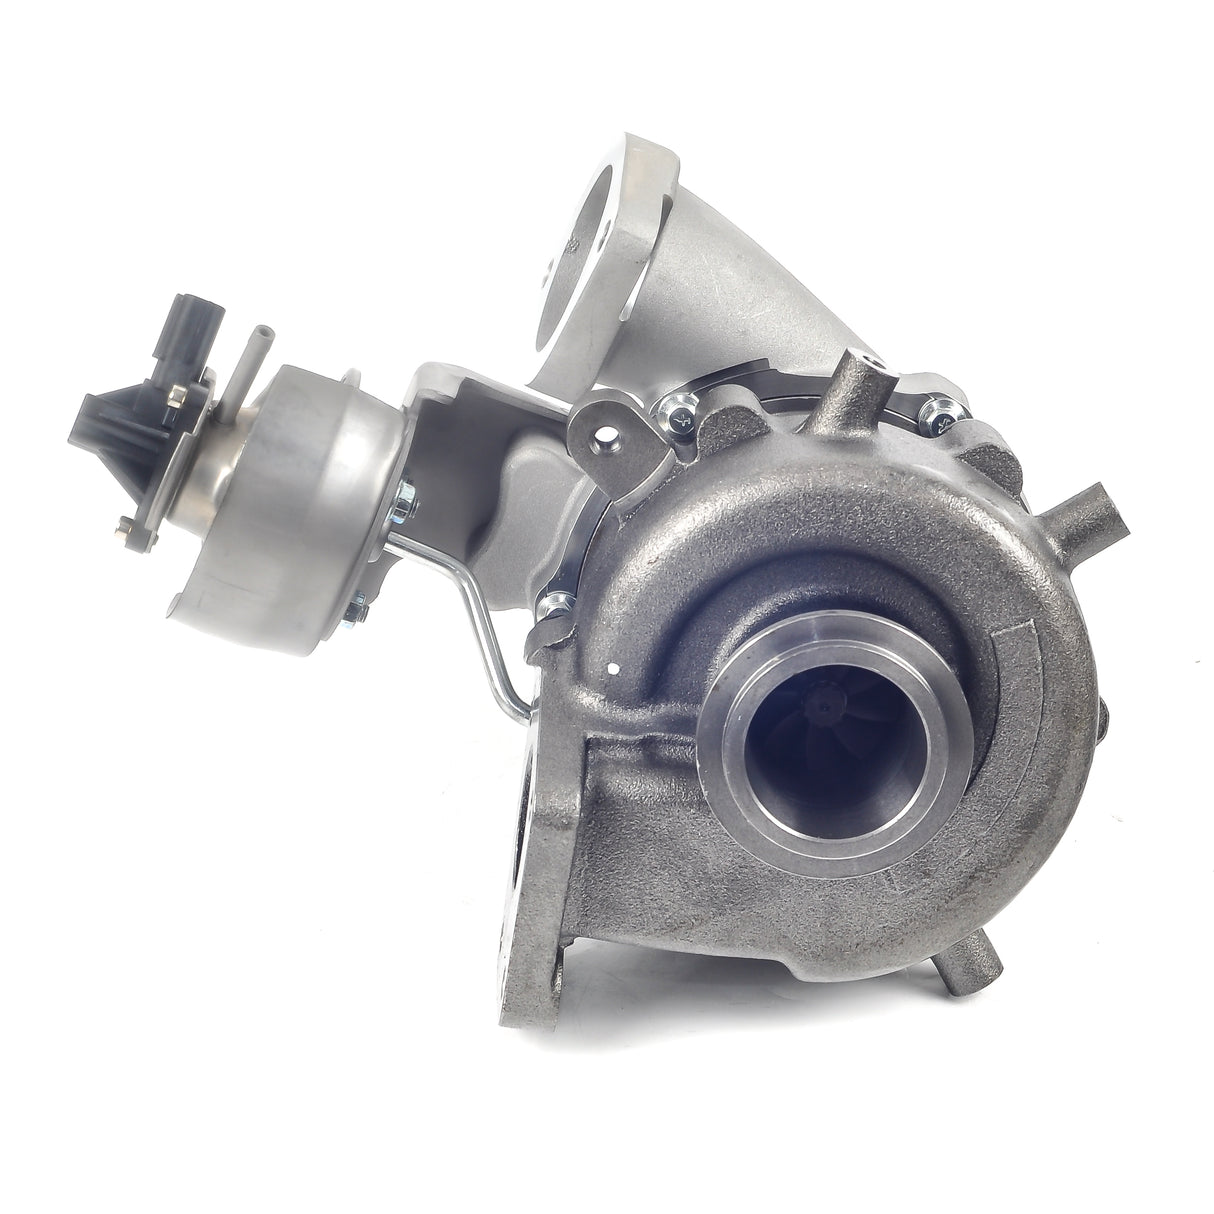 Holden Cruze Z20D turbo charger